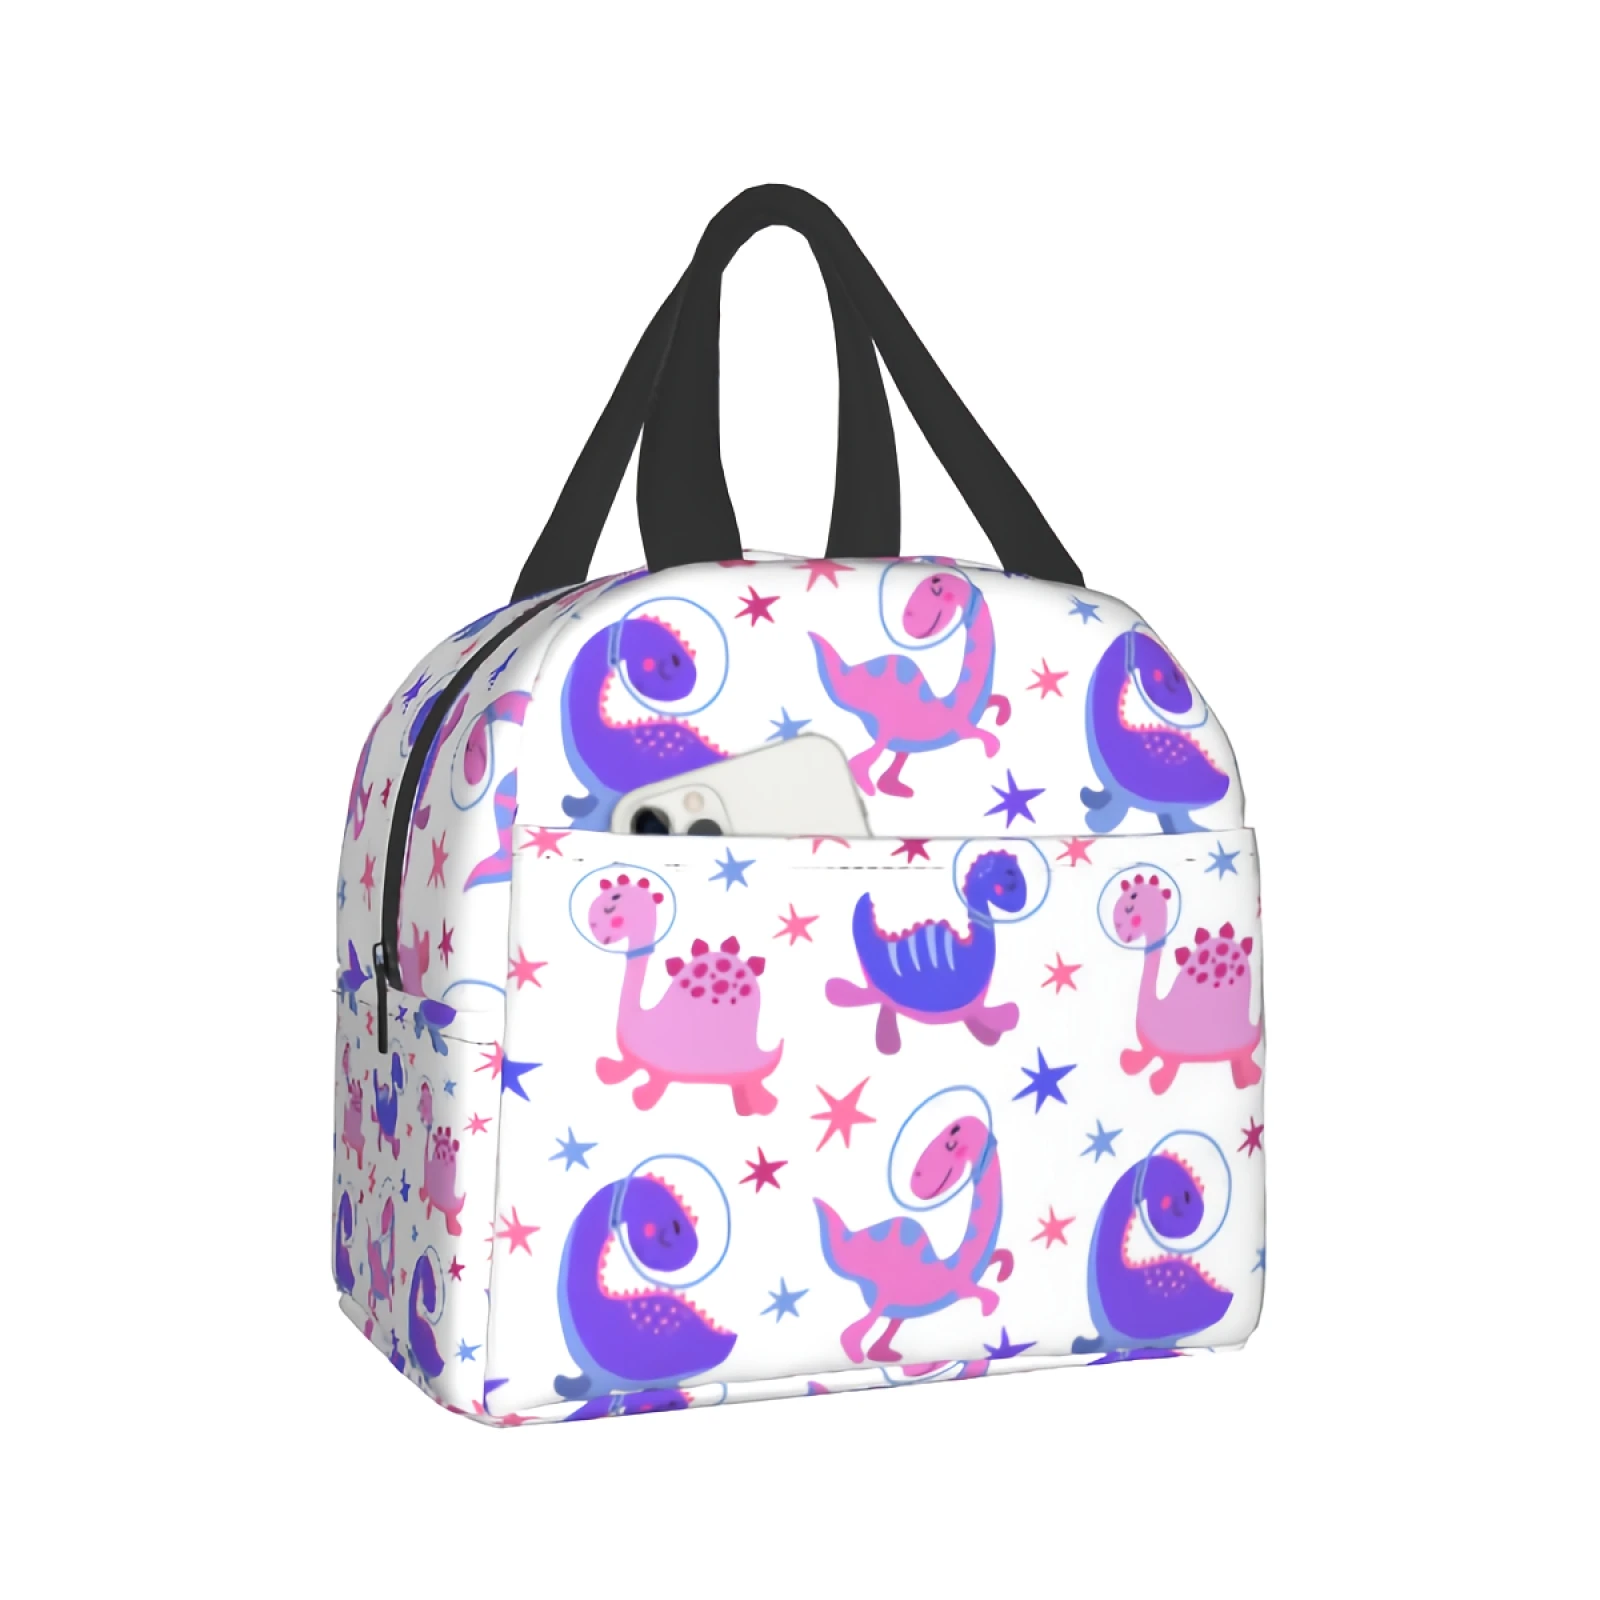 

Cute Dinosaurs In Cosmos Portable Insulated Lunch Tote Bag Waterproof for Men Women Kids Colorful Purple Pink Dino Pattern